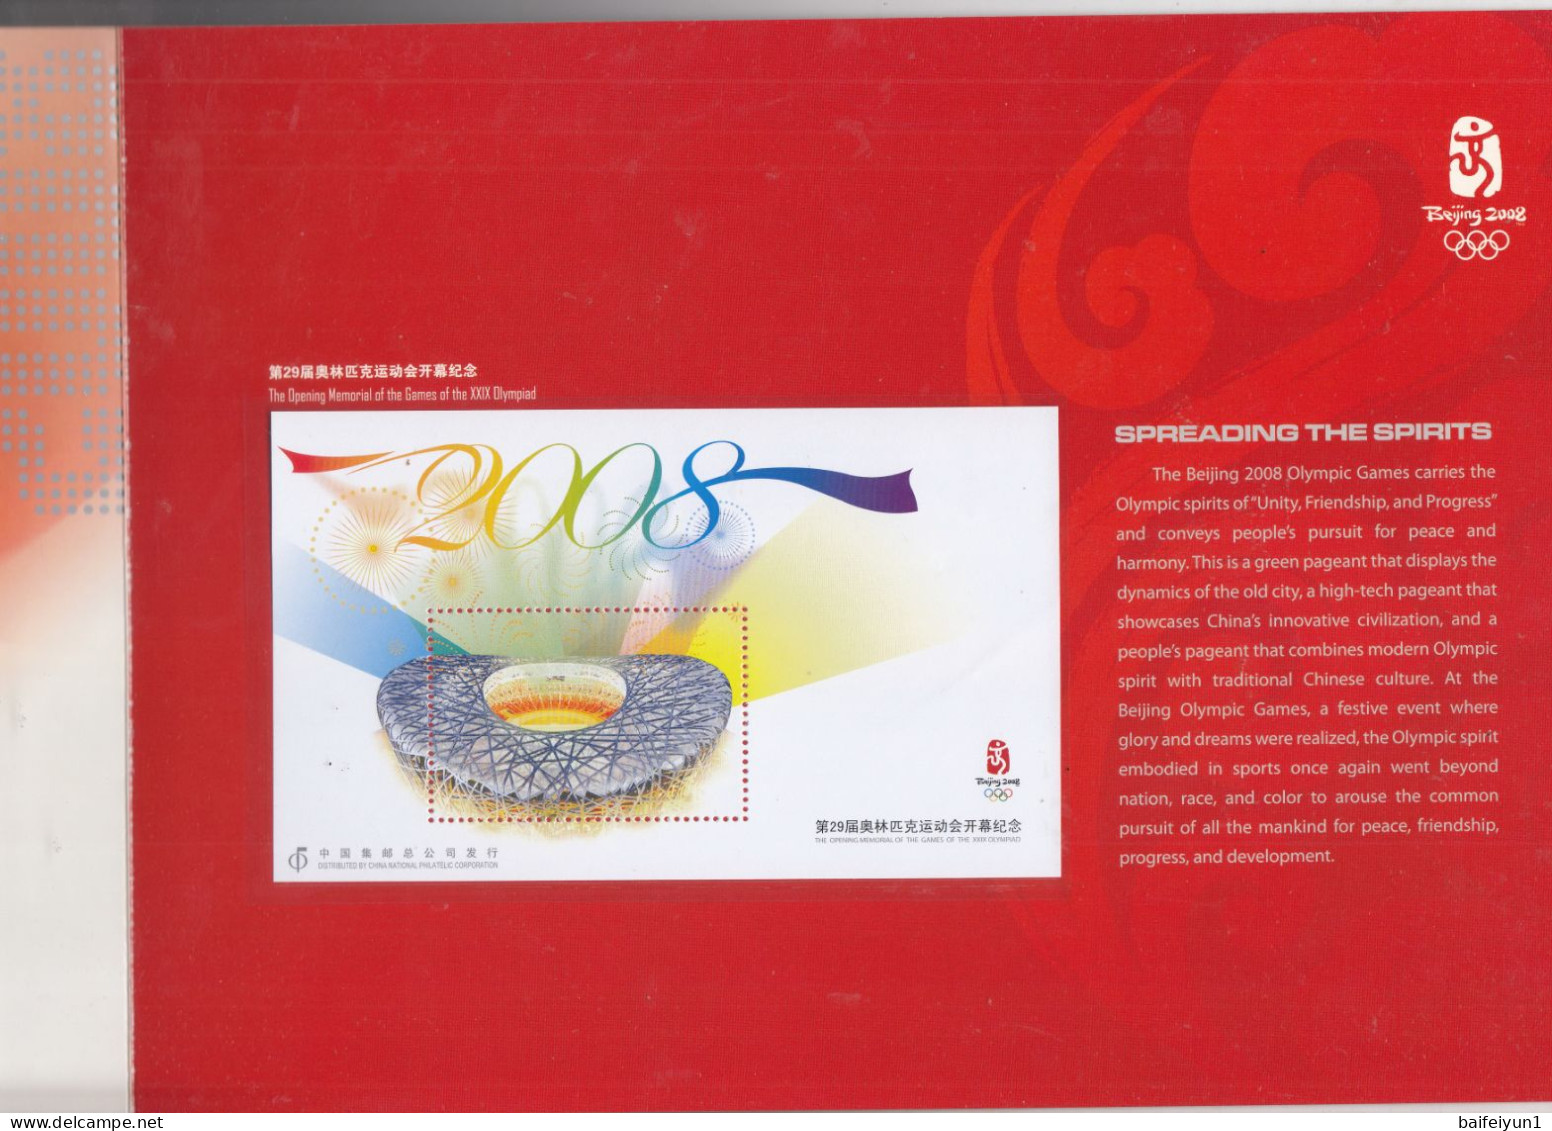 China 2008-18 Opening Memorial of the Games XXIX Olympic Full S/S Album(Hologram words on album)